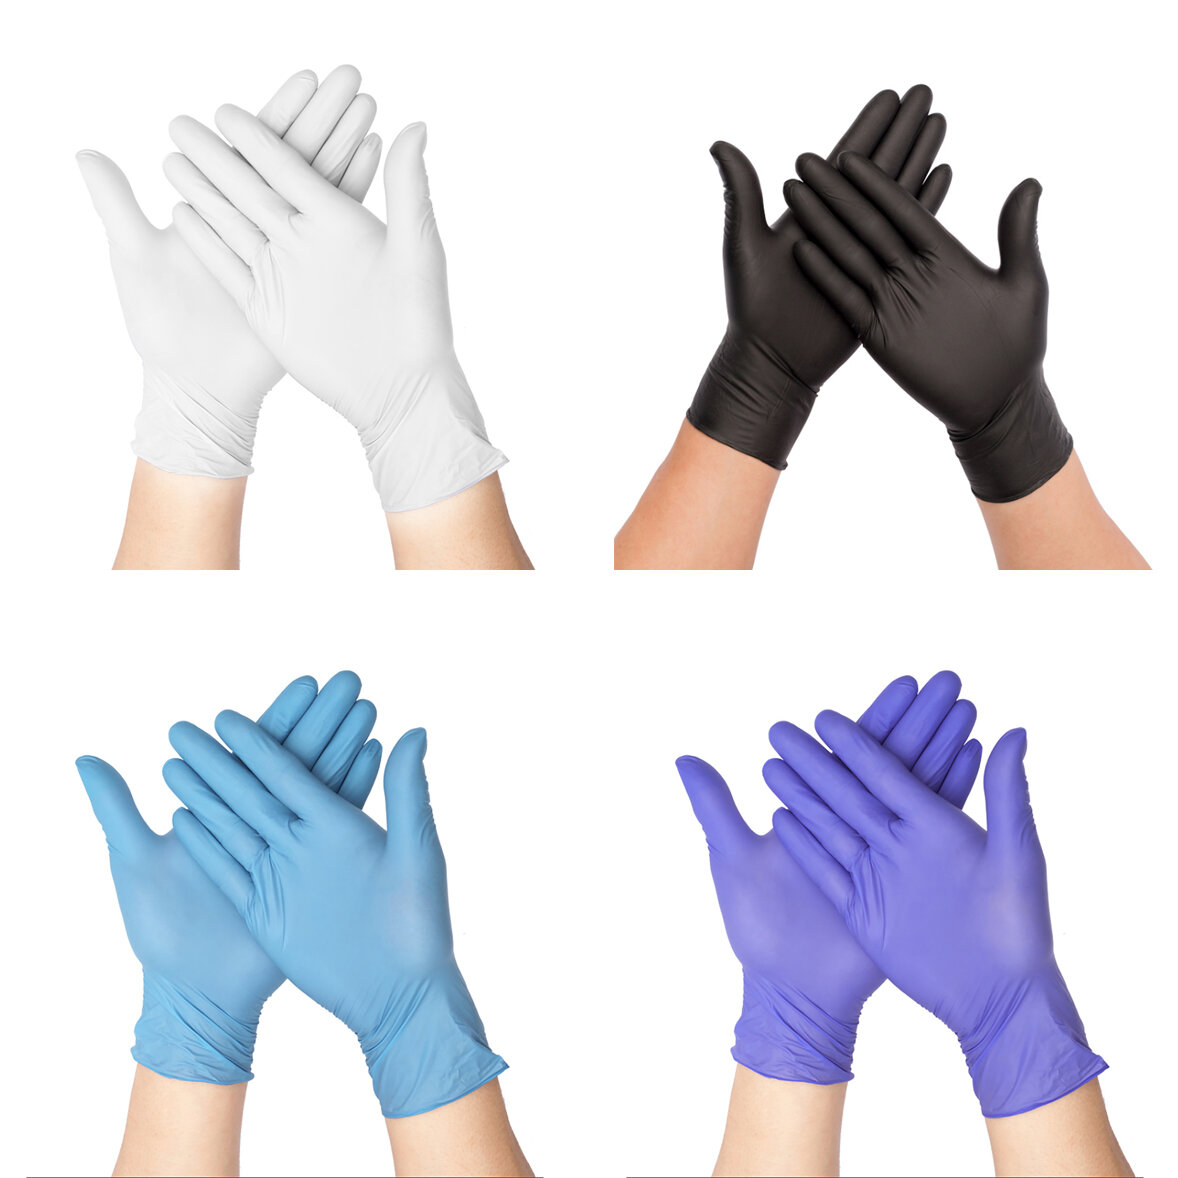 100PCS Disposable Gloves Nitrile Cleaning Food Gloves Universal Household Garden Kitchen Cleaning Ha